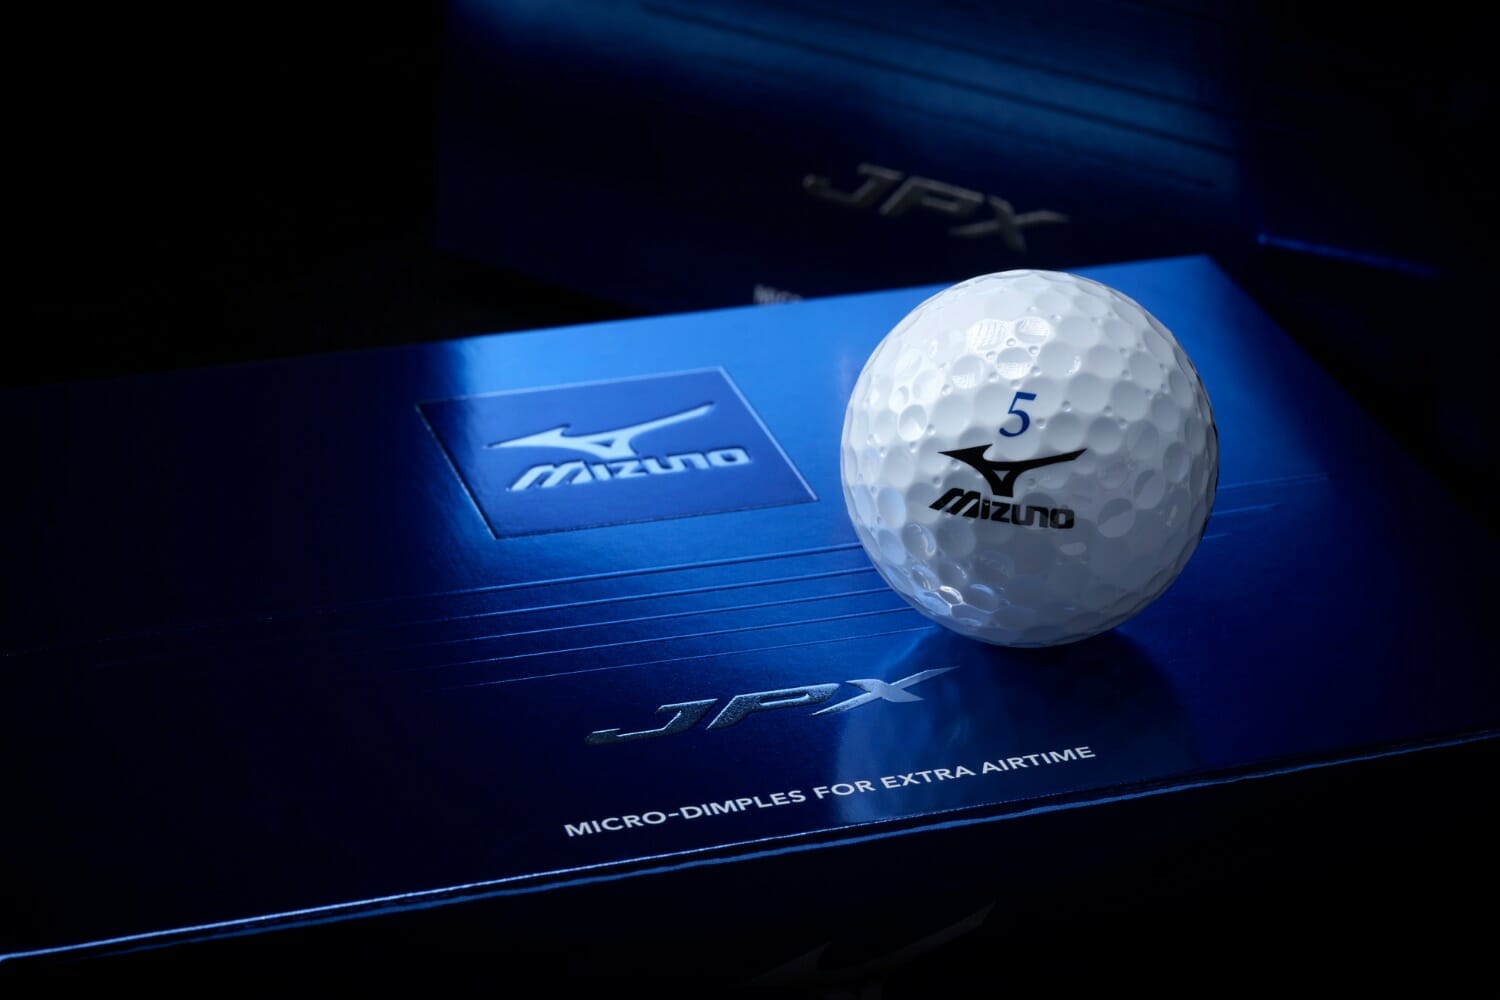 New softer Mizuno JPX ball with Micro Dimples